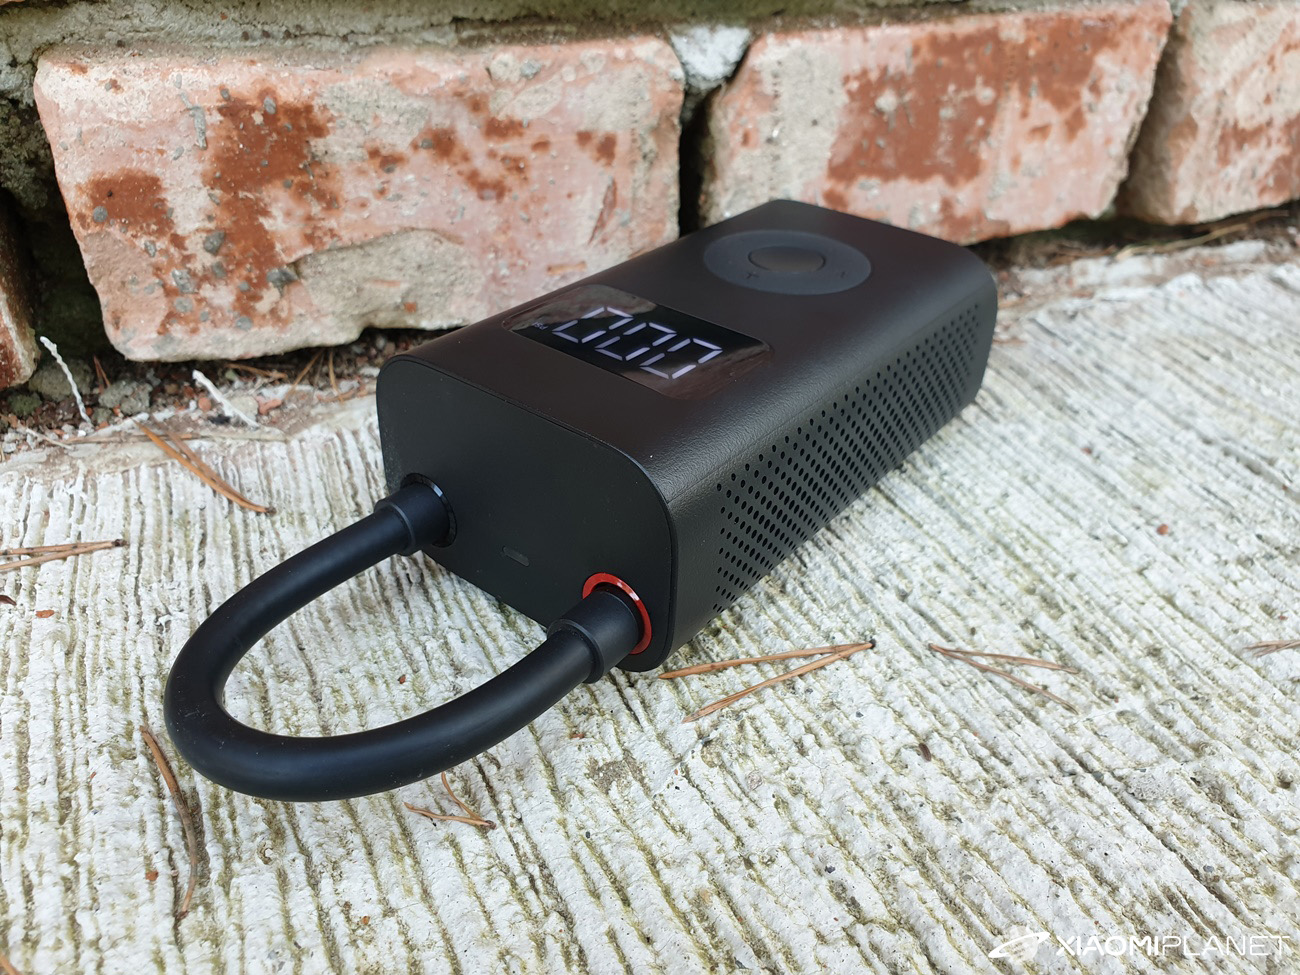 Xiaomi Mi Portable Air Pump Review: This gadget is a must have